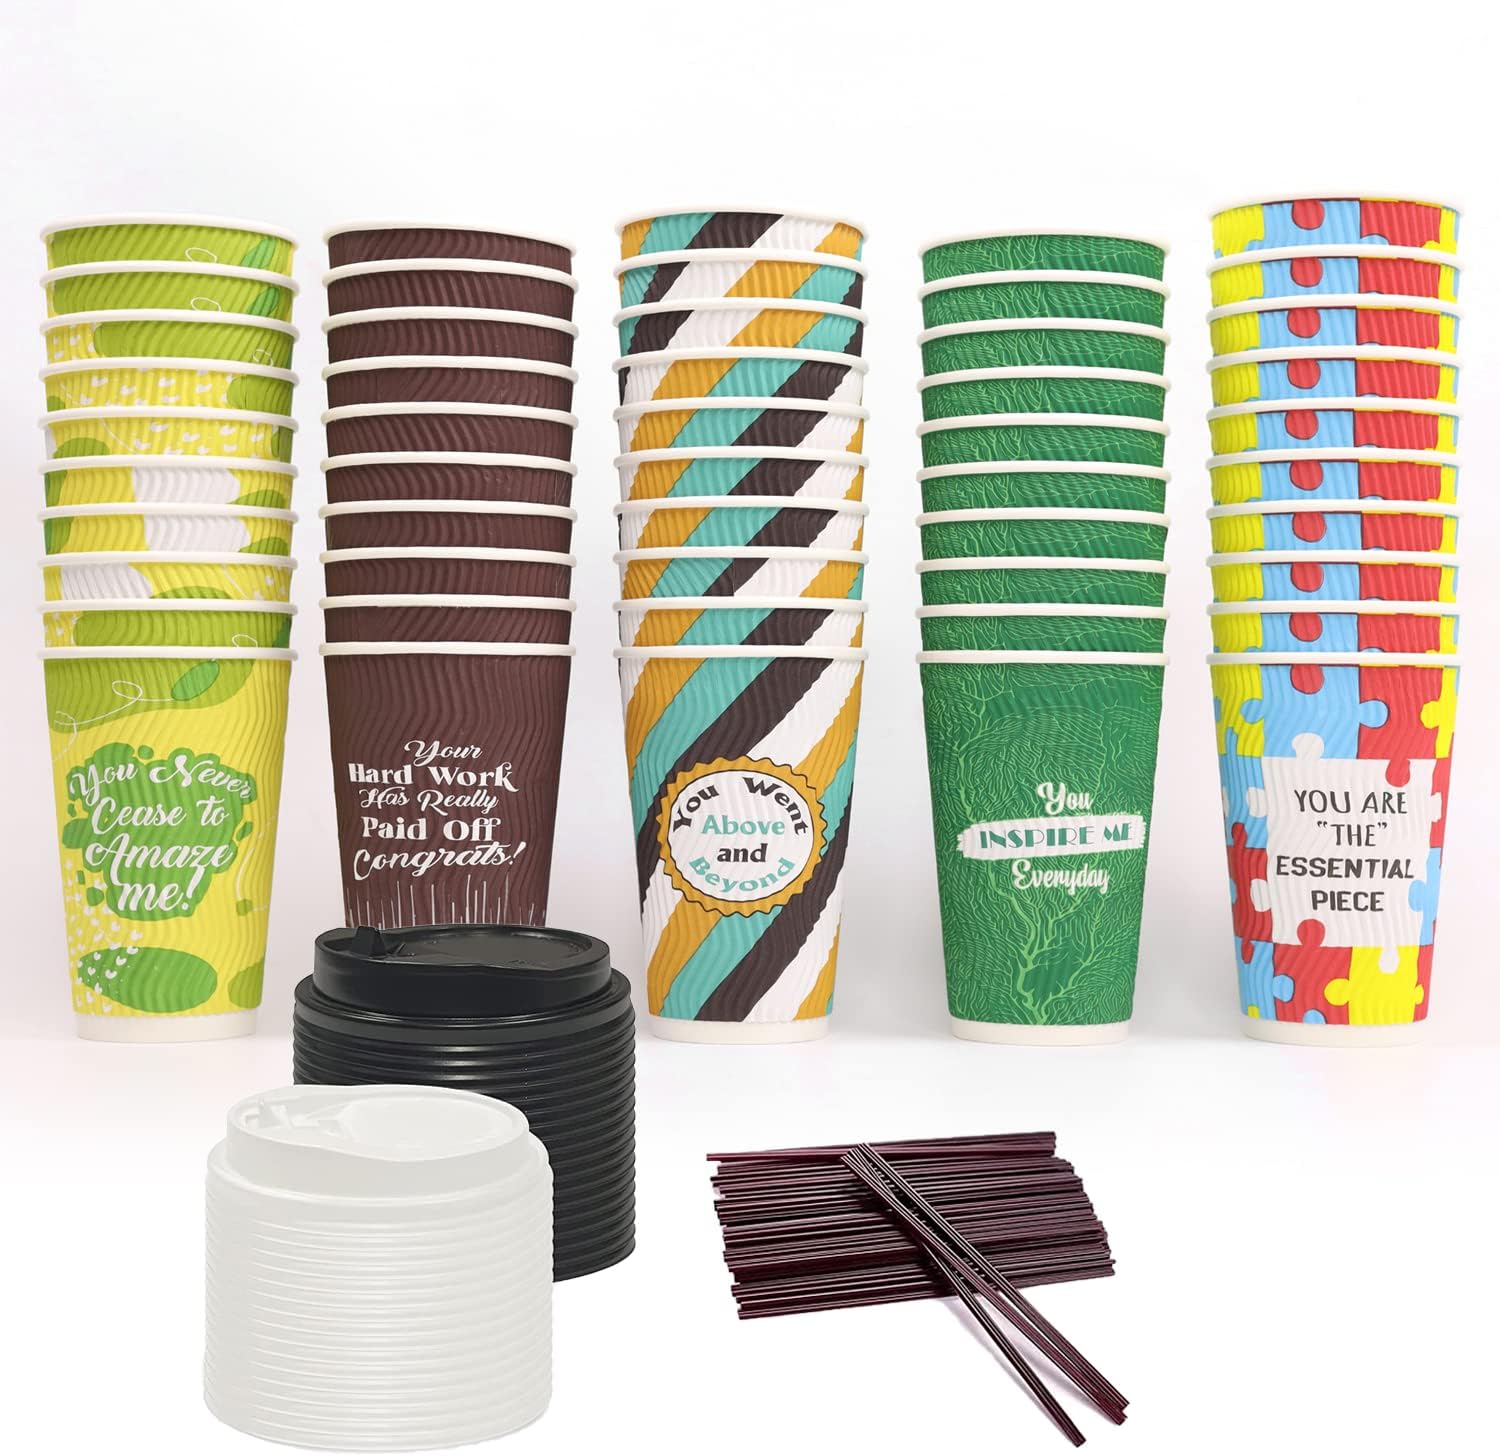 Clear Cups 16 oz (50 pieces)